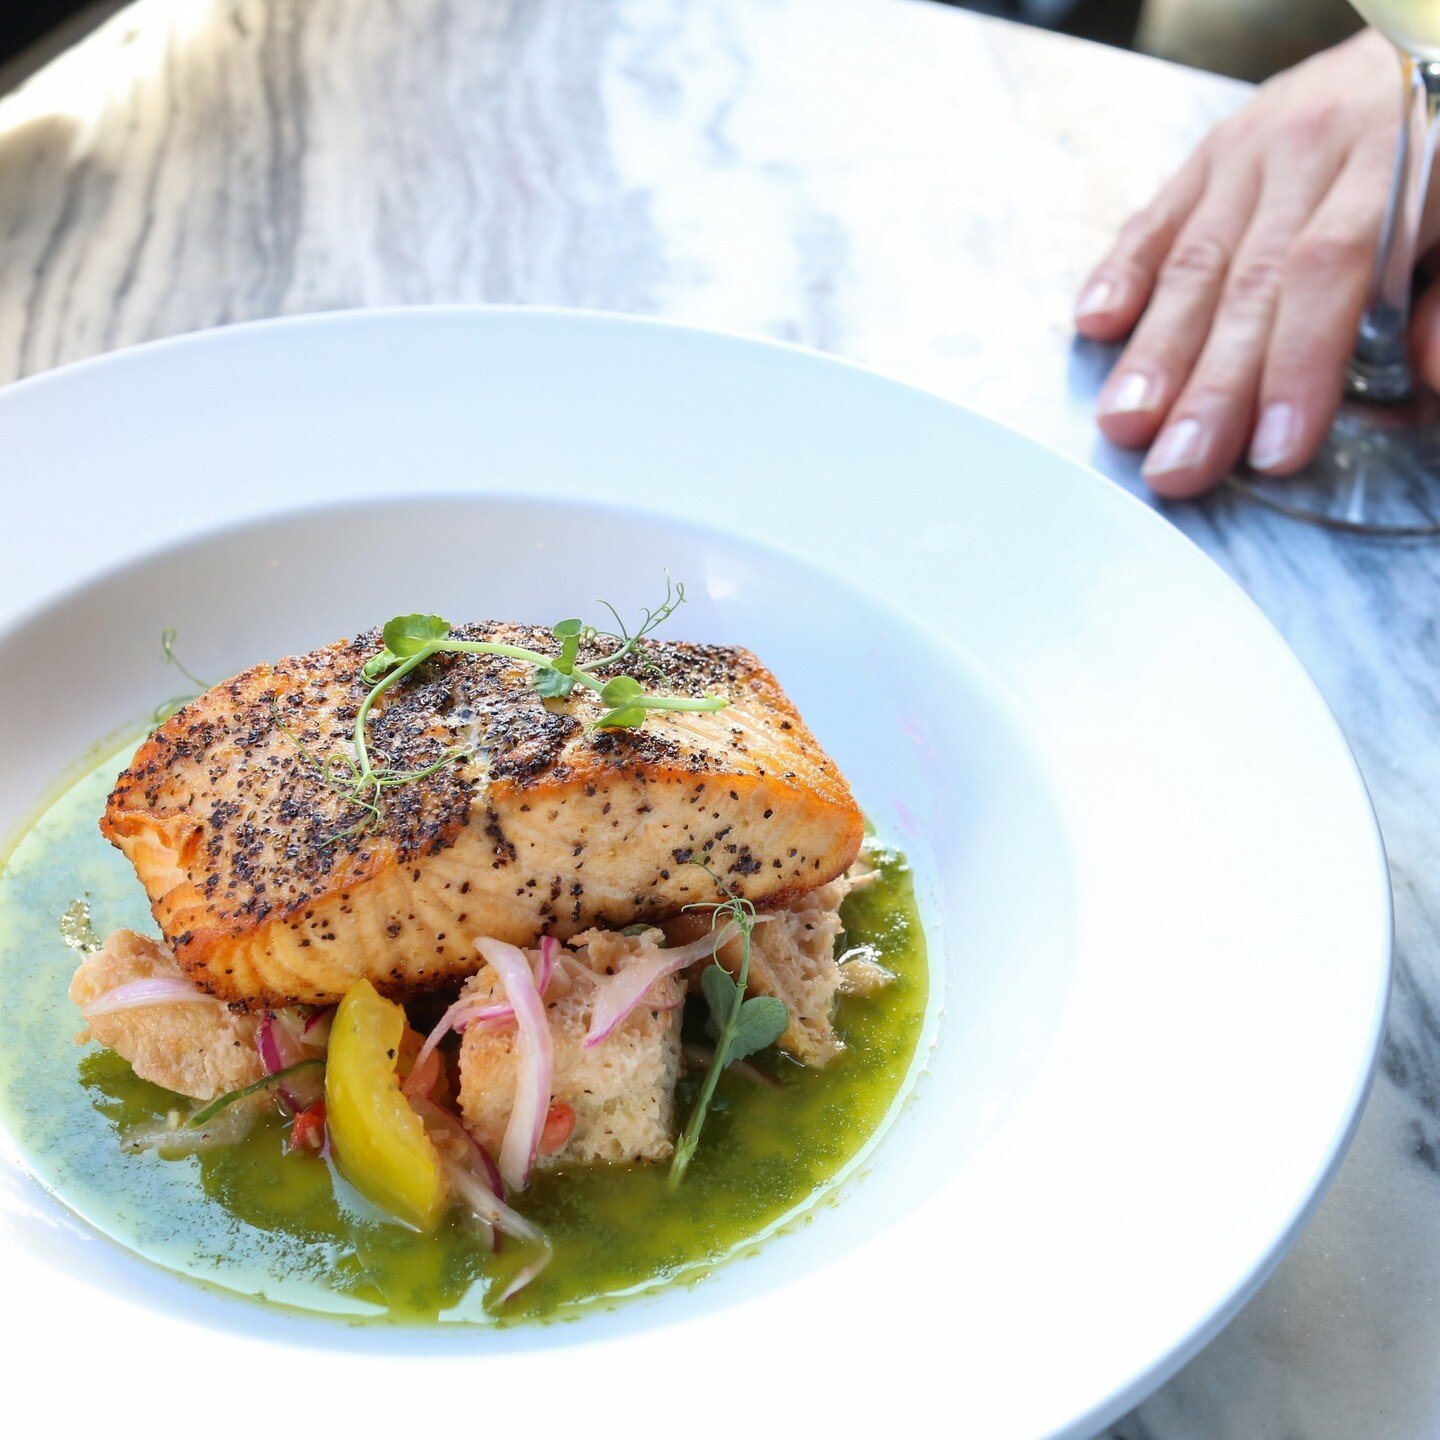 Arguably the best part of Restaurant Week here at Aposto; Salmon Panzanella. Pan seared salmon, bread &amp; tomato salad, basil vinaigrette. ⁠
⁠
Our Restaurant Week menu will be running until the 27th. Three courses, two options each, for $50. 🍷